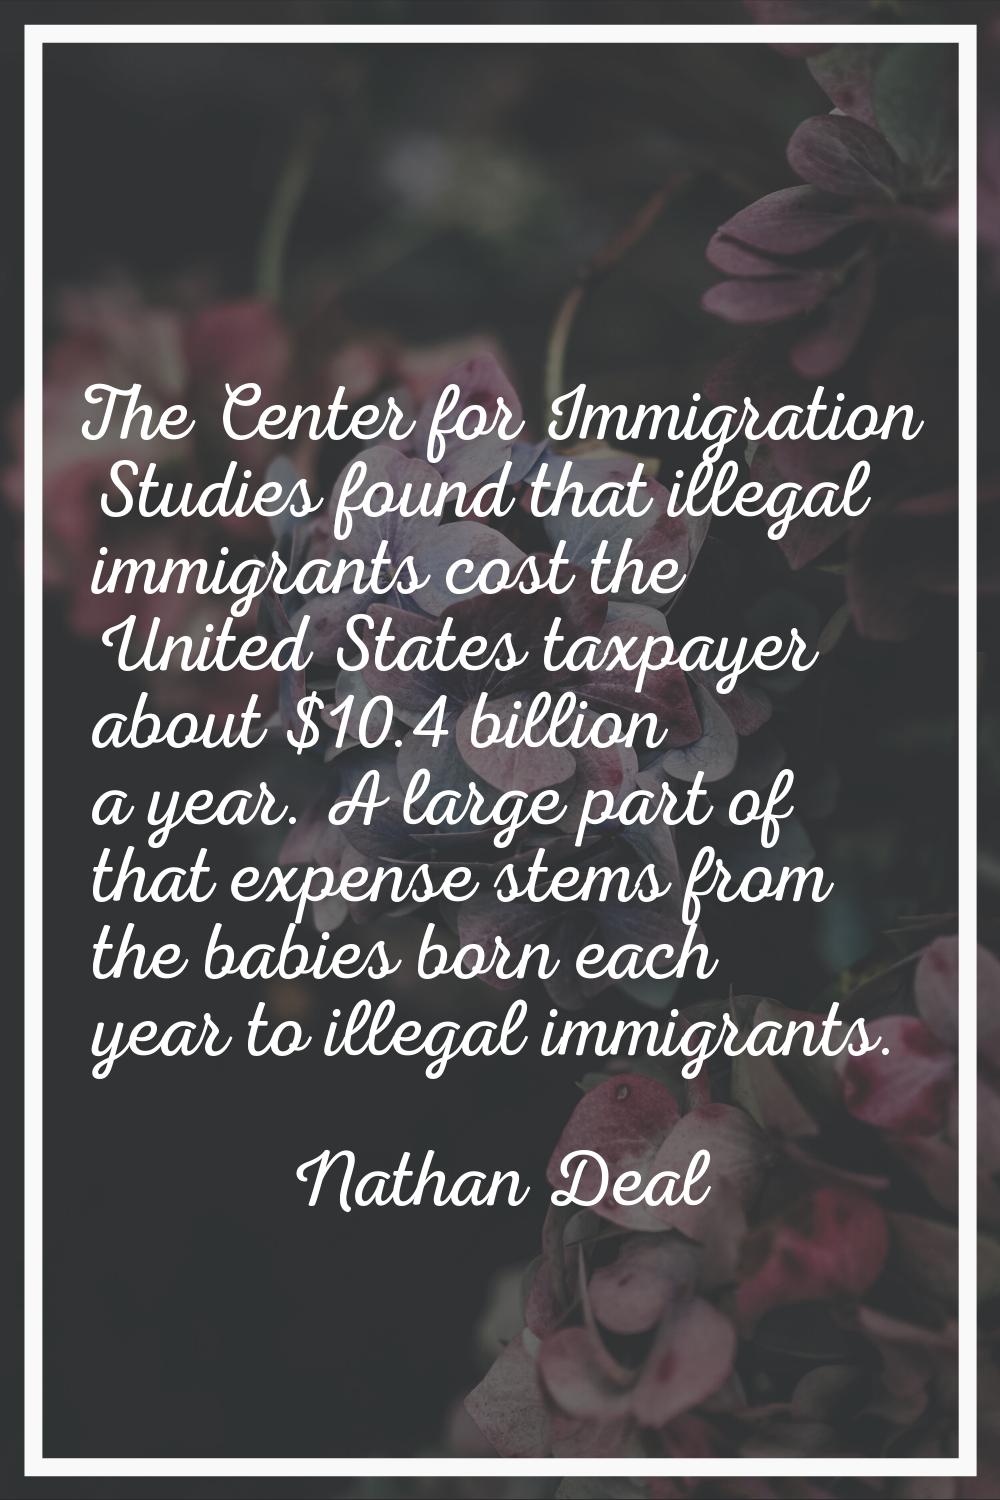 The Center for Immigration Studies found that illegal immigrants cost the United States taxpayer ab